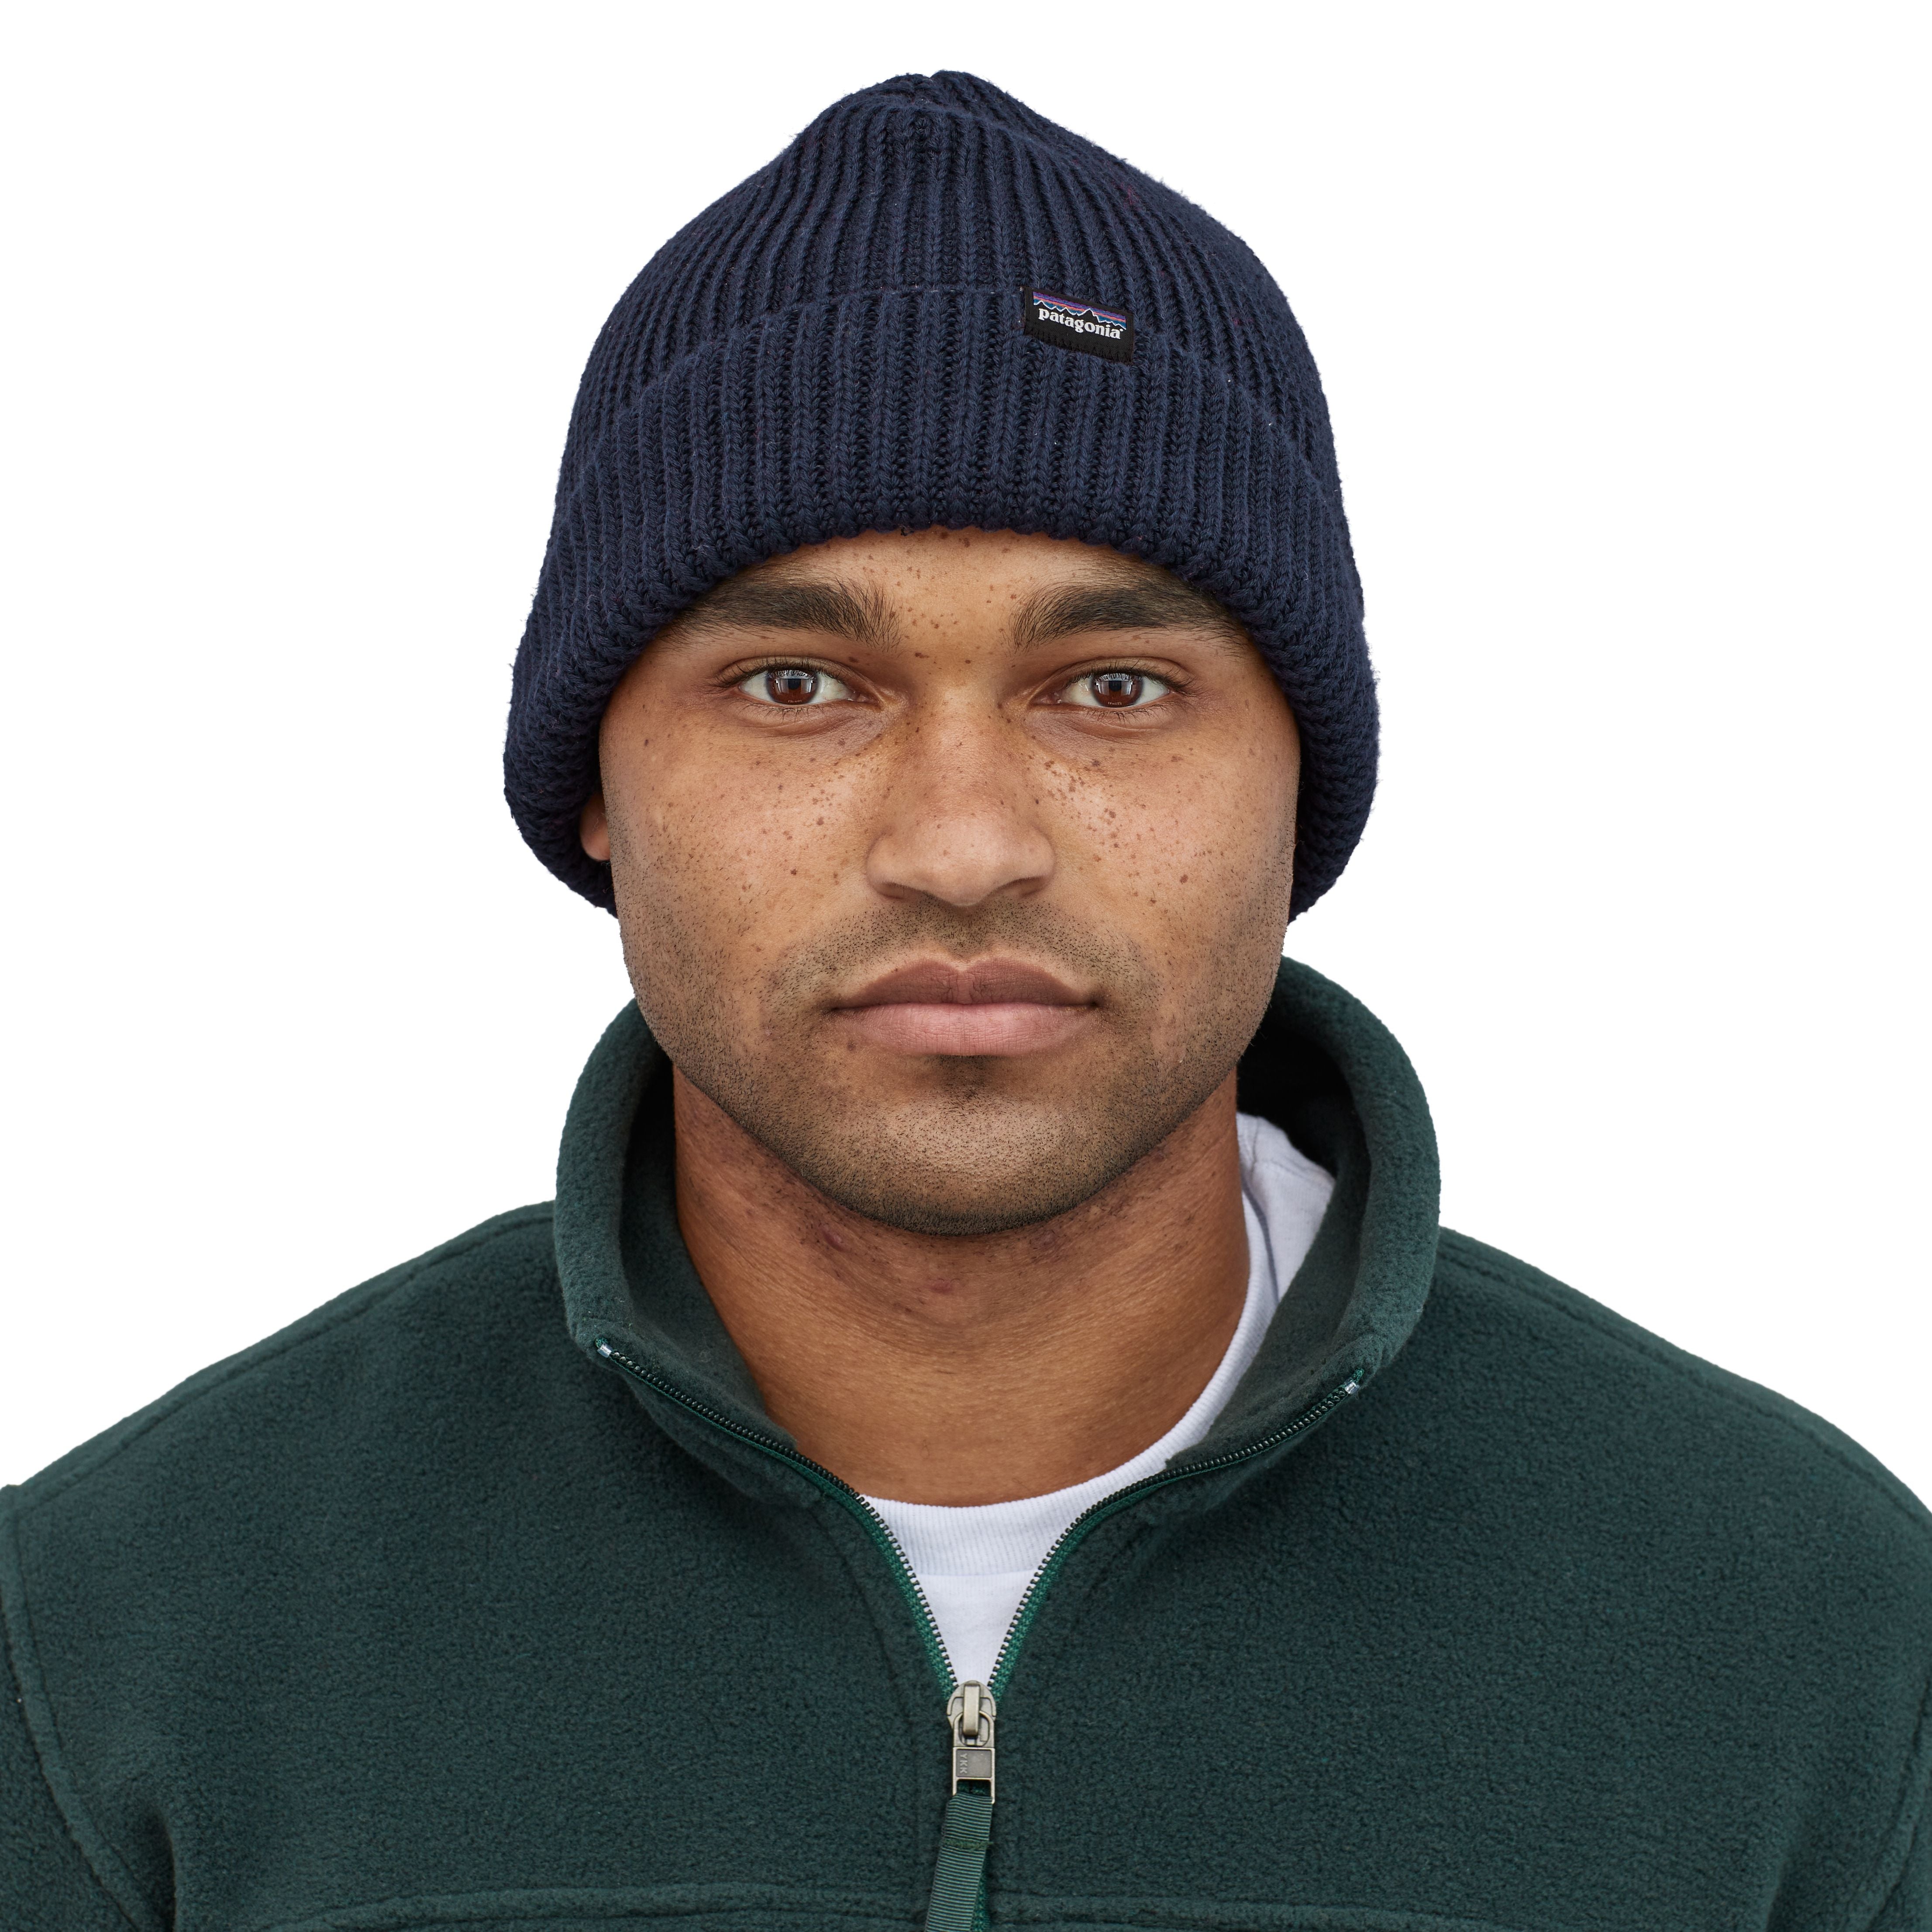 Patagonia Fisherman's Rolled Beanie Navy Blue Image 02